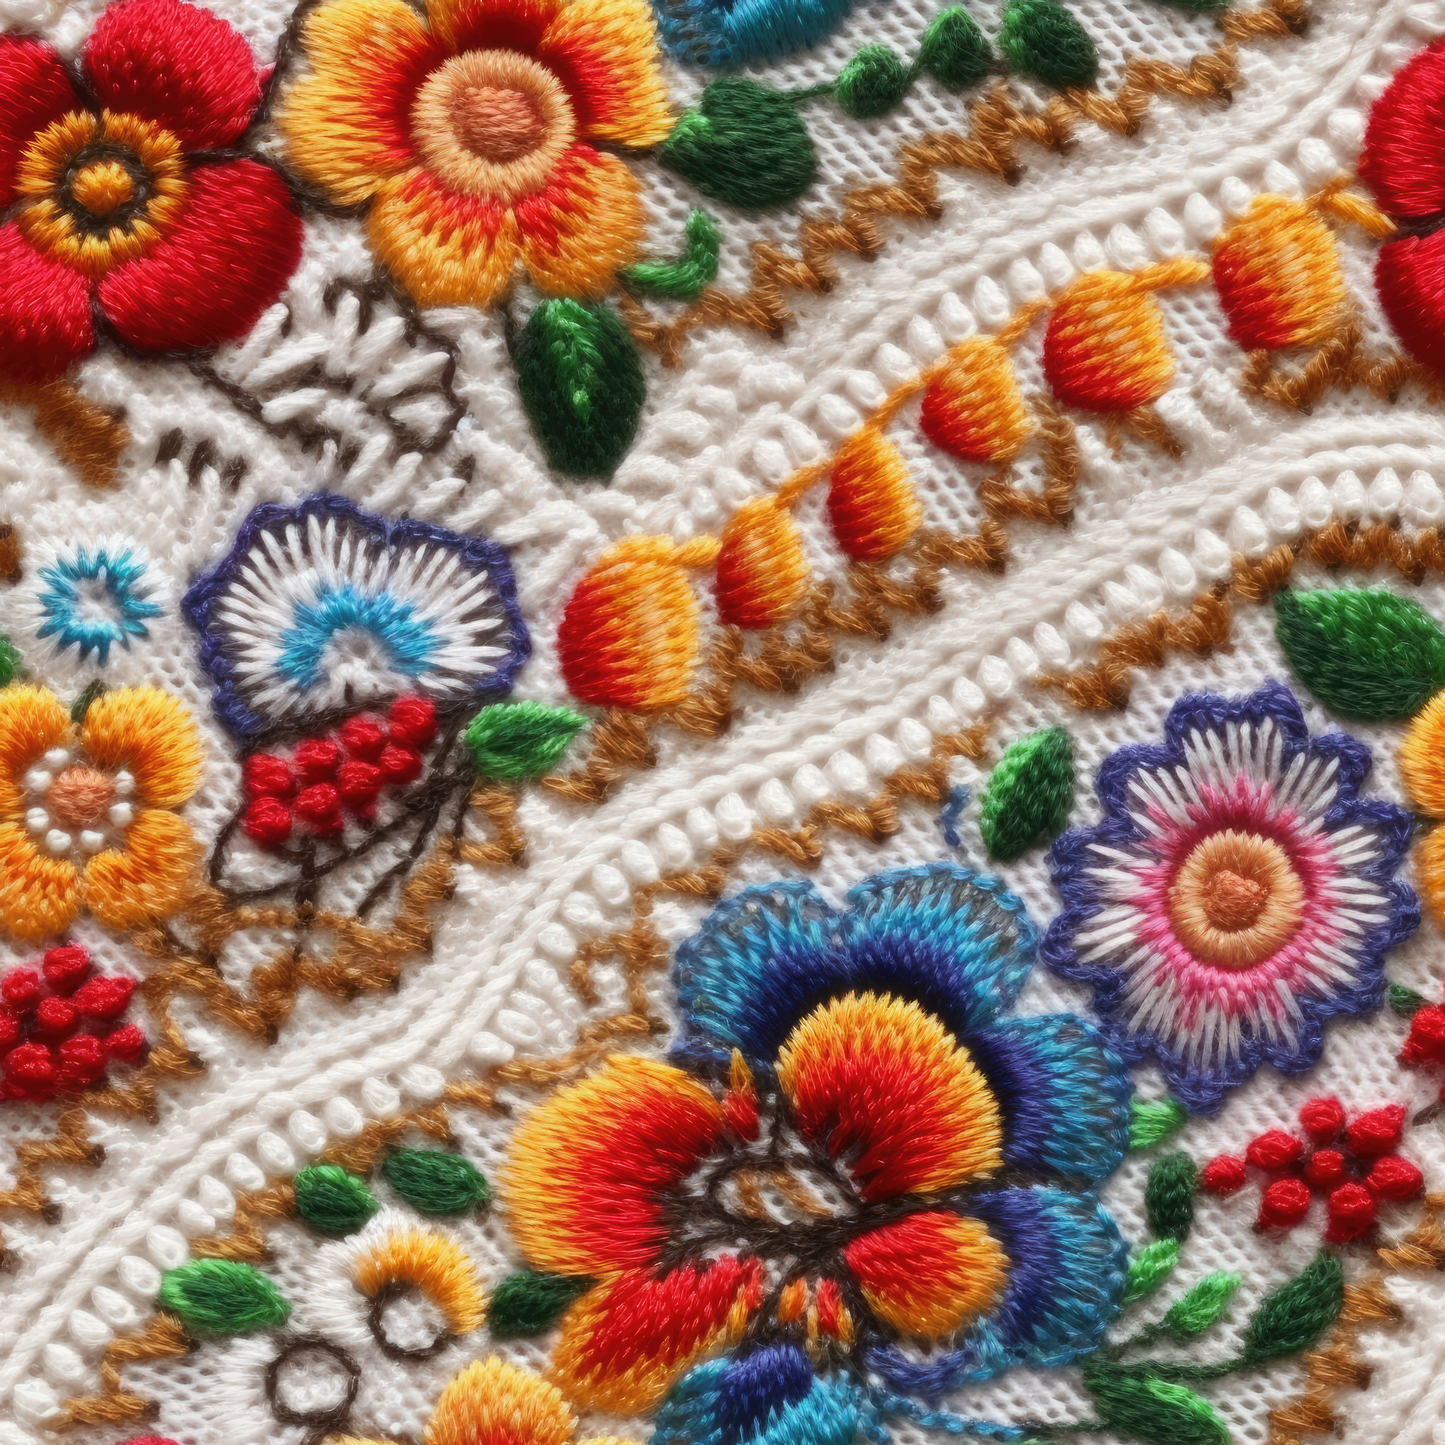 EMBROIDERY - MULTIPLE VARIATIONS